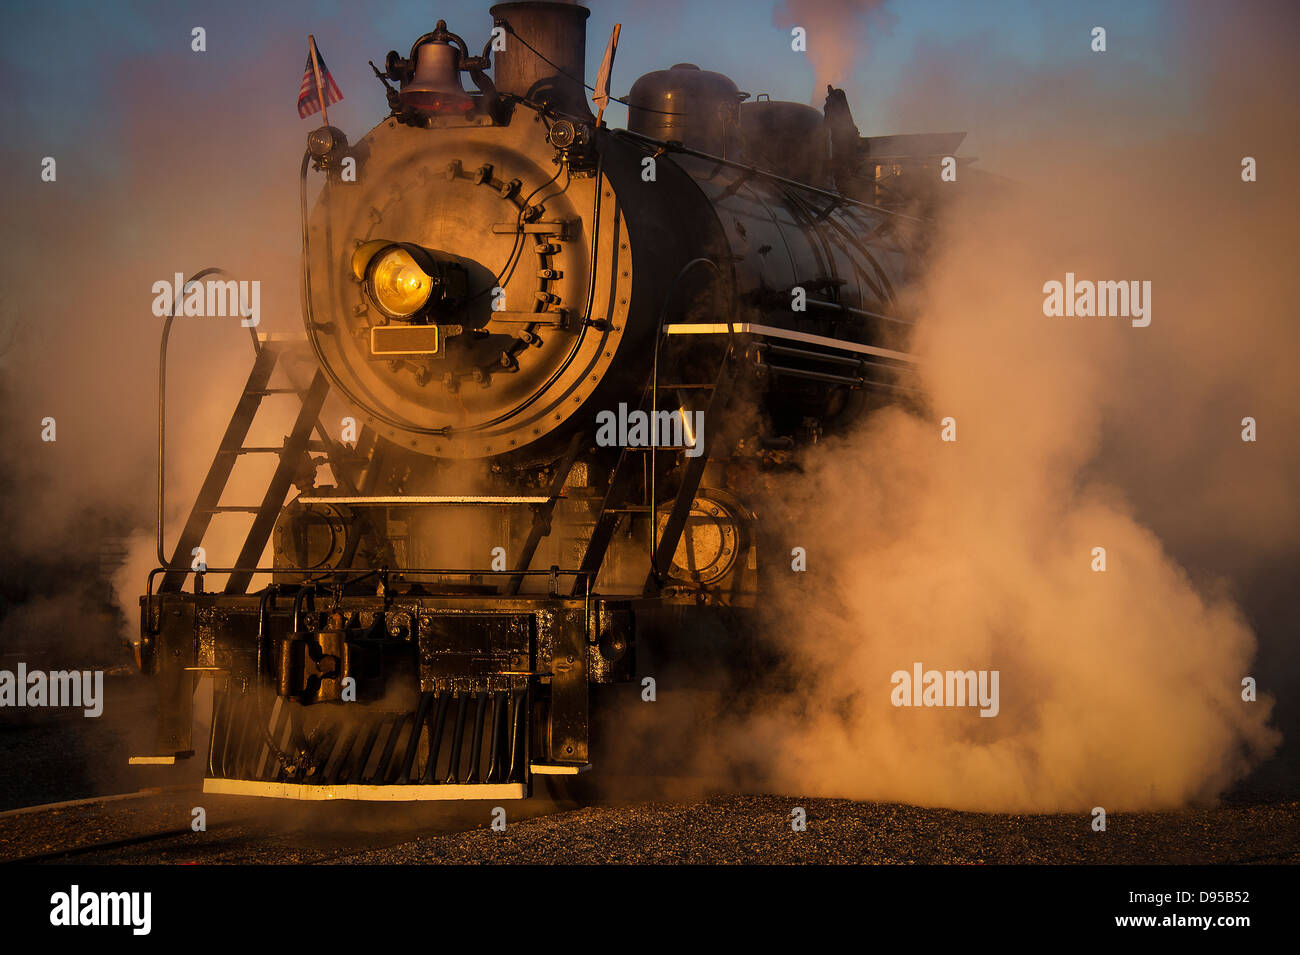 An antique steam engine rolls on the tracks in North Carolina. This steam engine was retired in 1952. Stock Photo